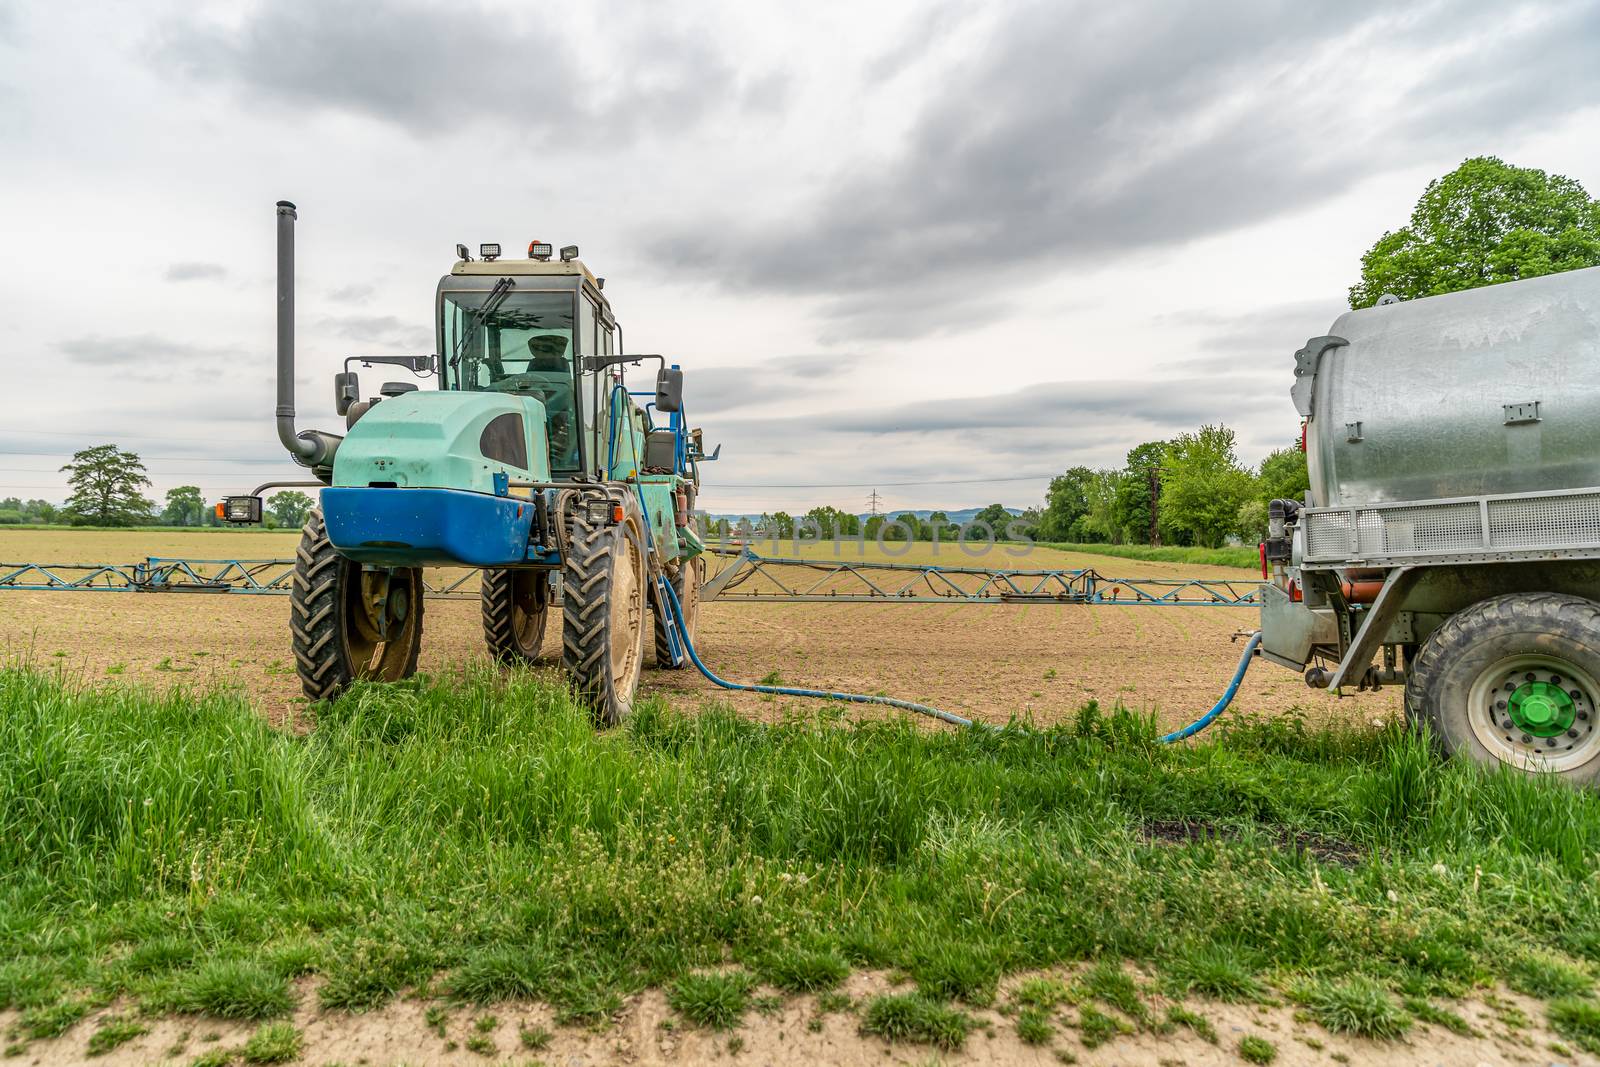 tractor adapted for spraying weeds and pests in field by Edophoto